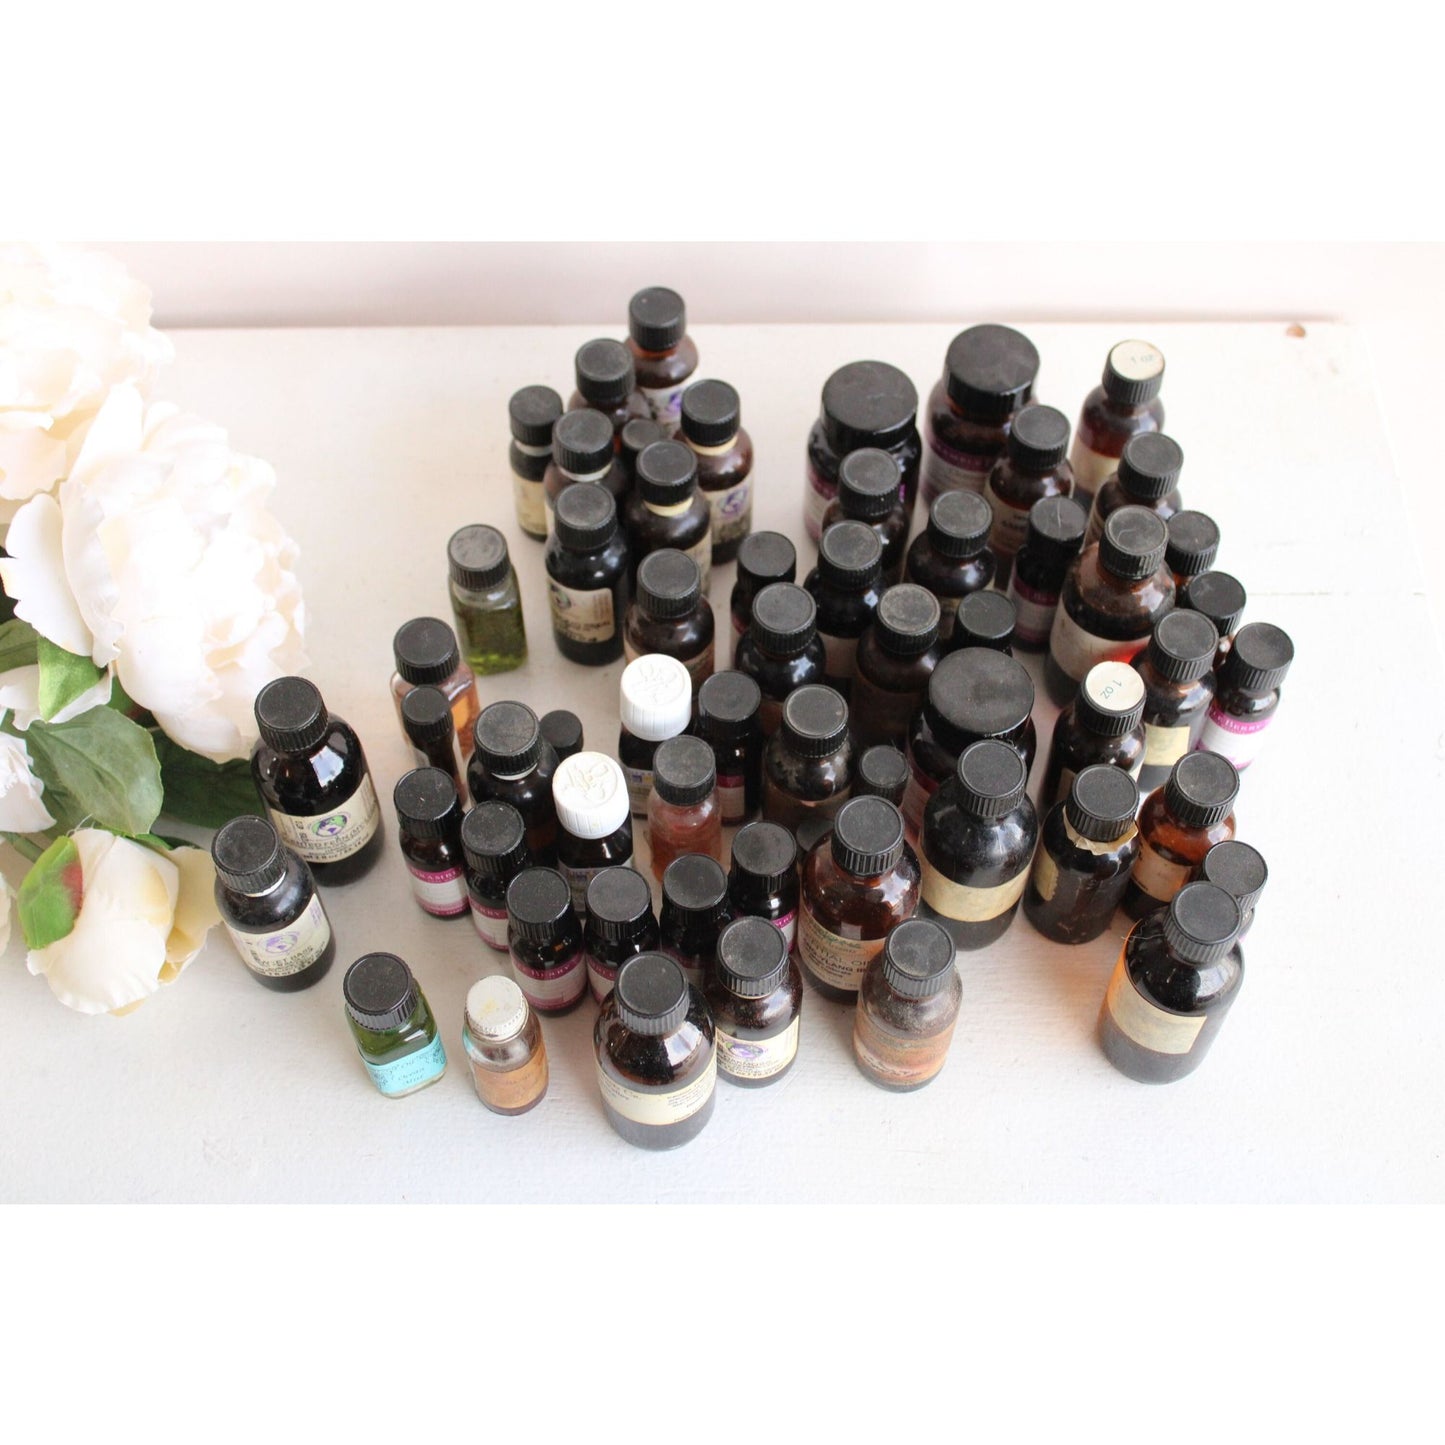 Essential and Fragrance Oils Lot, Approx. 60 Bottles, Mixed Scents, Mixed Brands